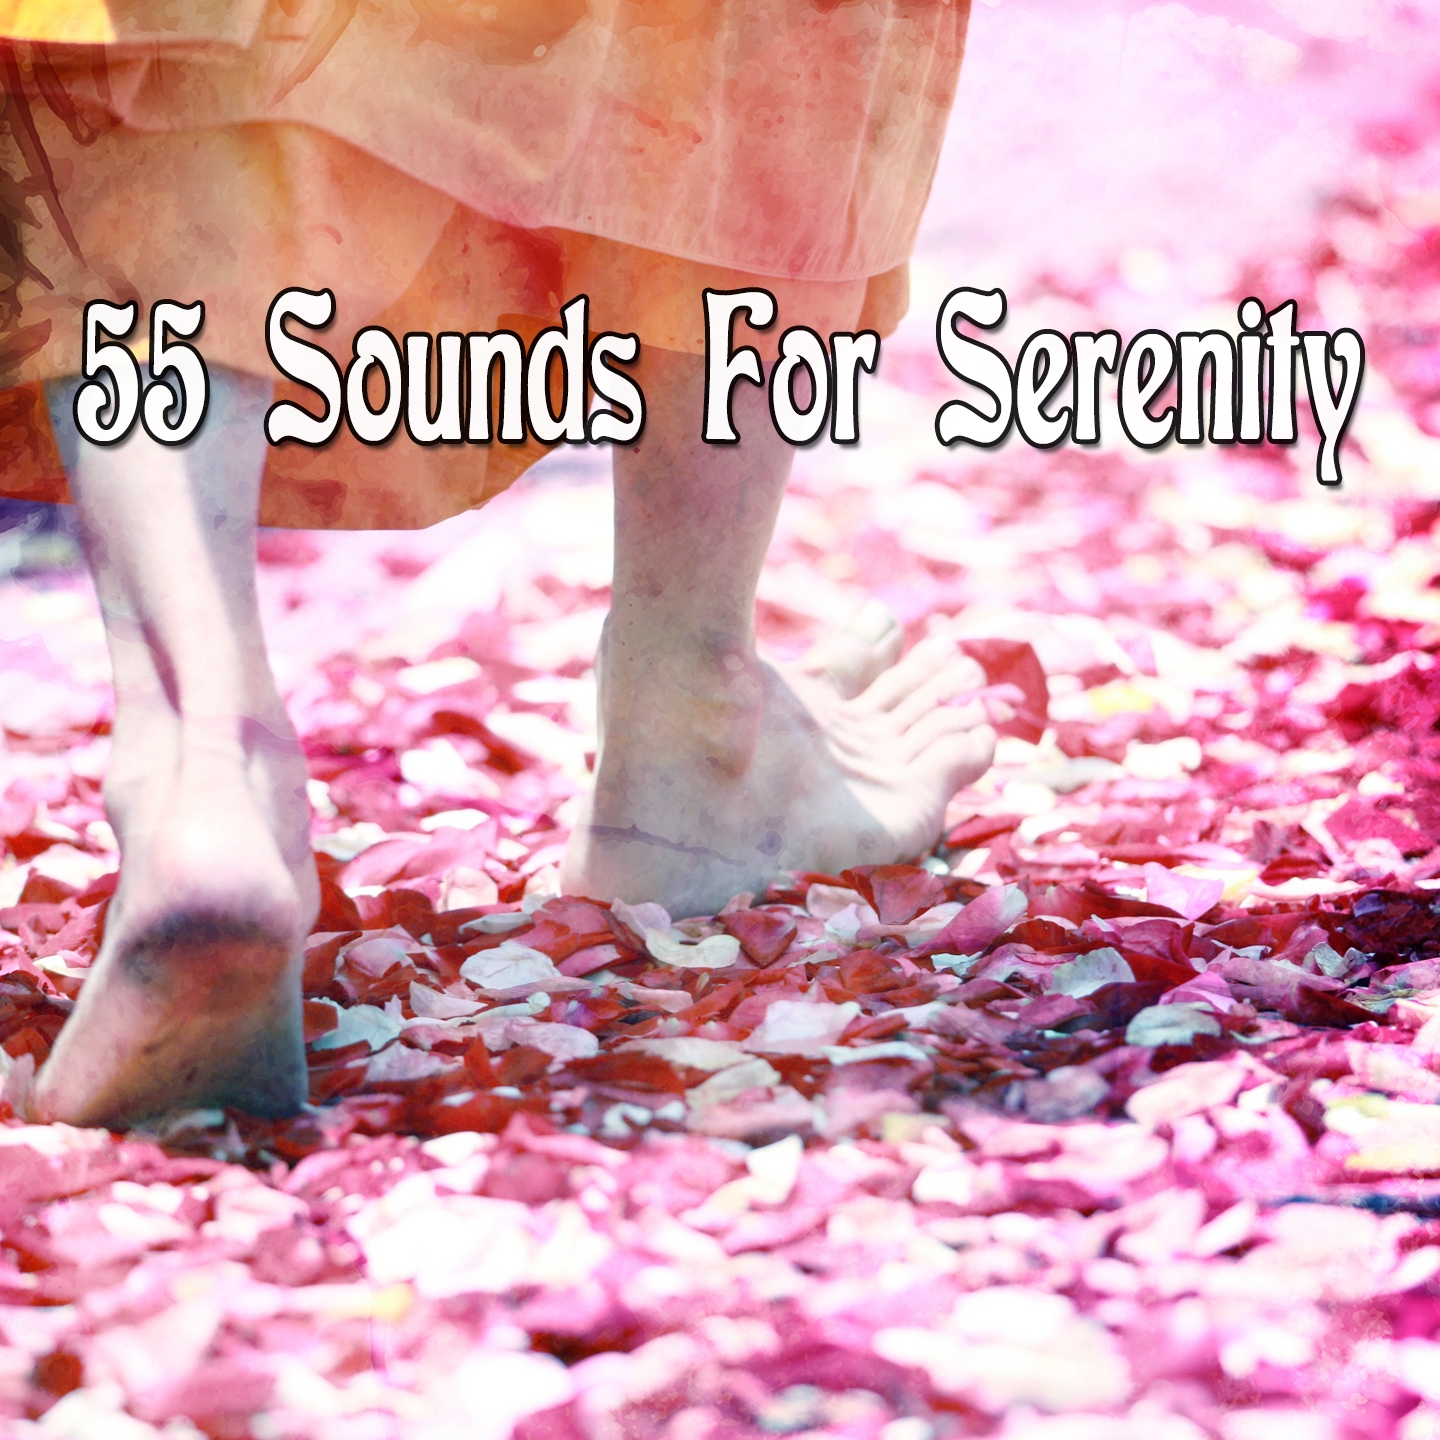 55 Sounds for Serenity